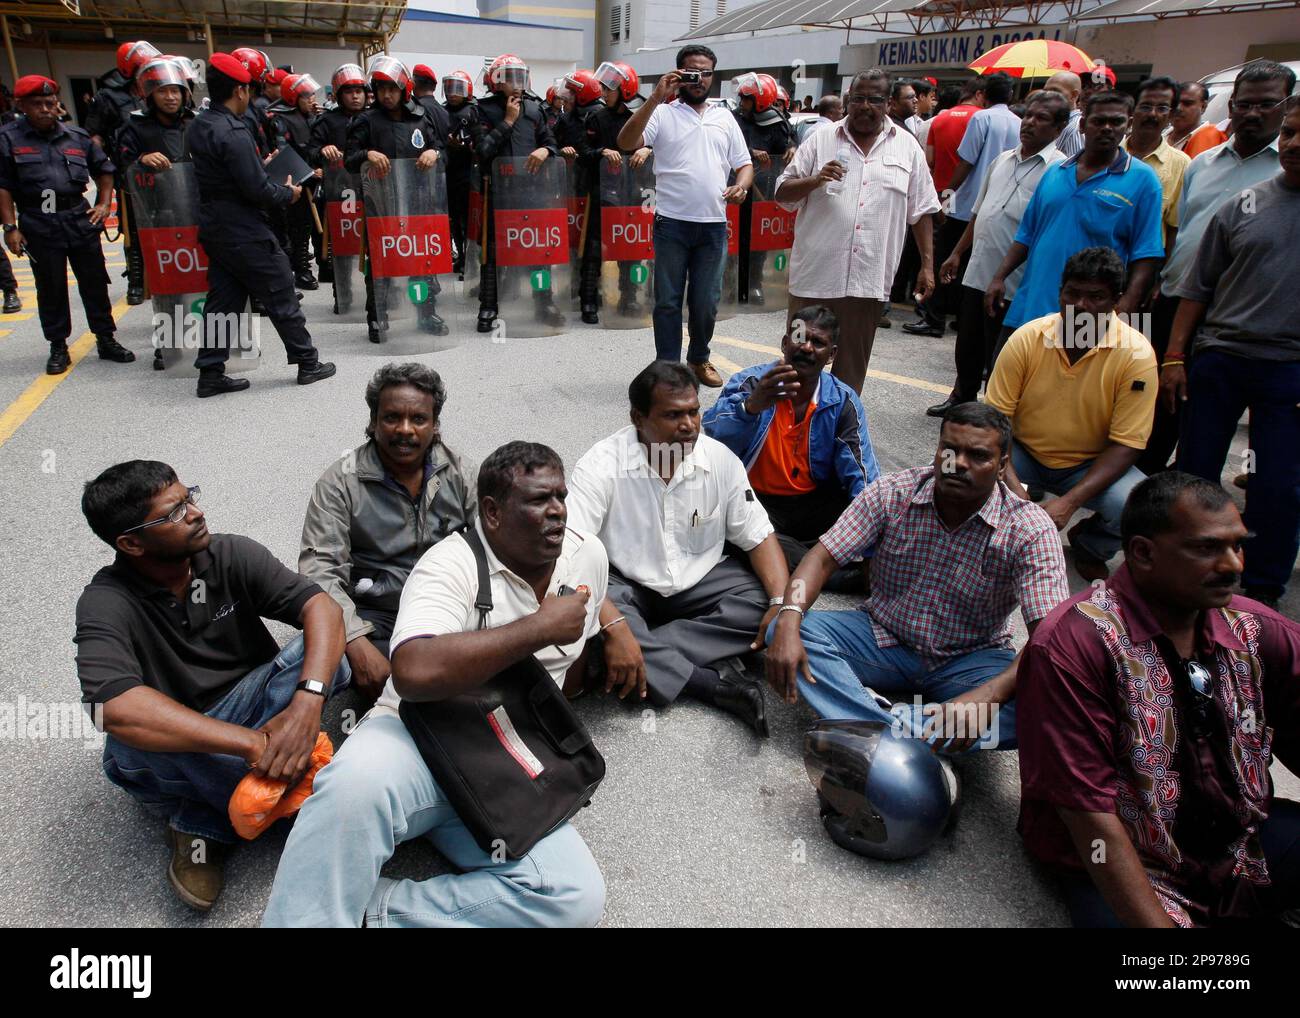 Family members and friends of Ananthan Kugan sit outside the forensic department at the University of Malaya Medical Center as riot police look on in Kuala Lumpur, Malaysia, Wednesday, Jan. 28, 2009. Hundreds of ethnic Indians gathered amid tight security near Malaysia's largest city Wednesday to mourn 22-year-old Kugan whose family believes he was killed by police while in custody. Activists say more than 80 detainees - mainly from the ethnic Indian minority - have died under questionable circumstances in the past decade. (AP Photo/Vincent Thian) Stock Photo